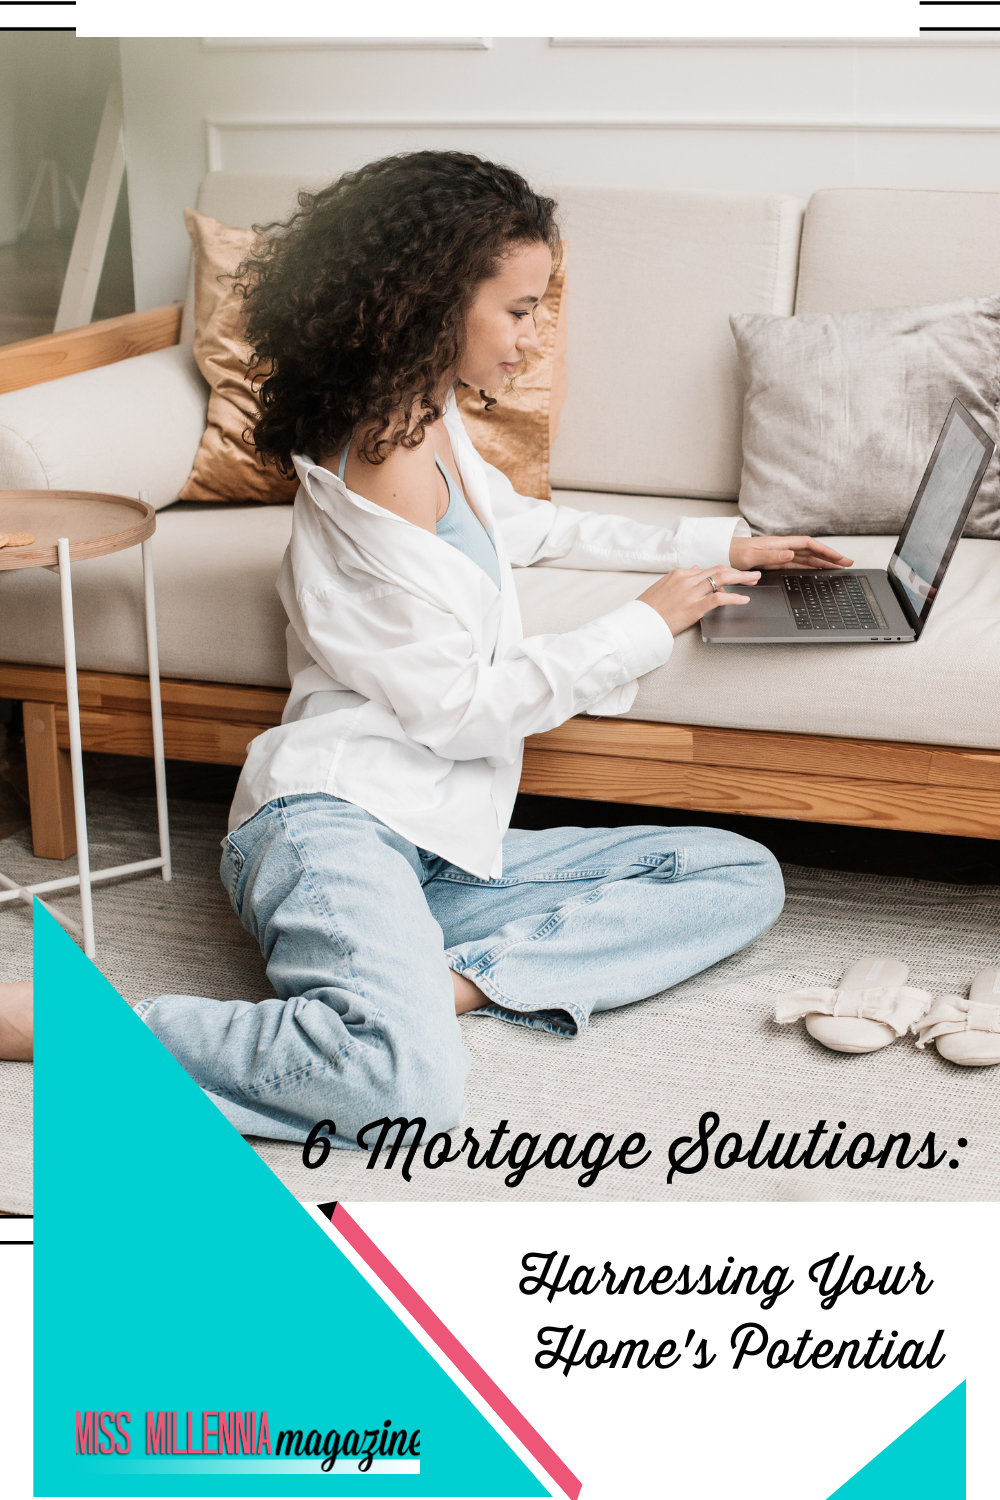 6 Mortgage Solutions: Harnessing Your Home’s Potential